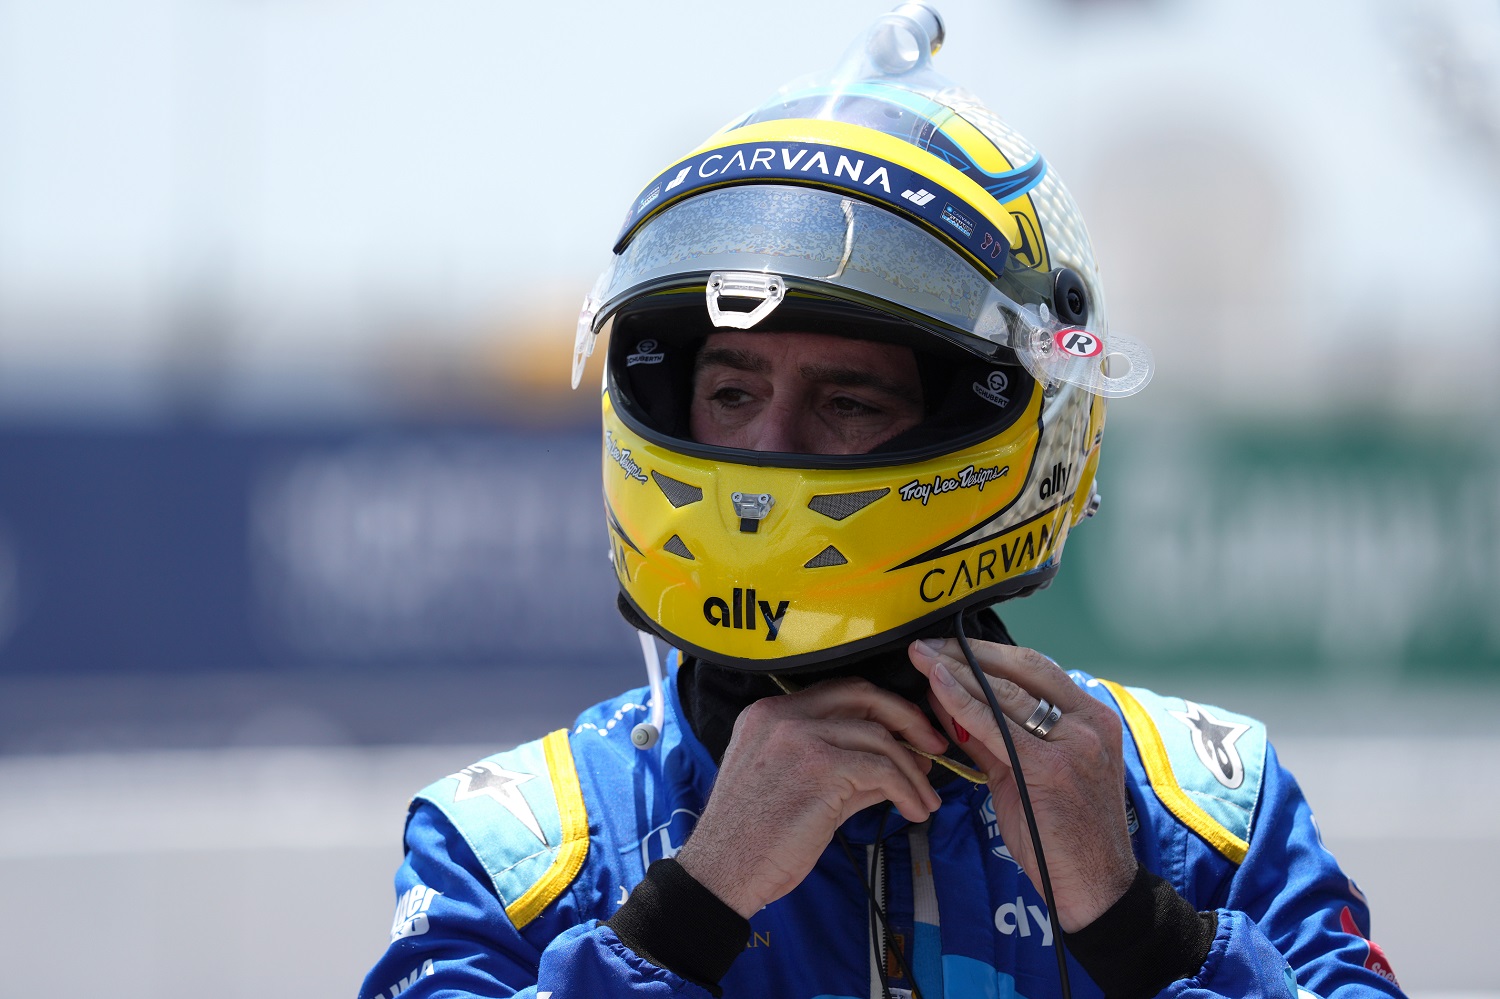 Jimmie Johnson, driver of the No. 48 Chip Ganassi Racing Honda, gets ready to qualify for the NTT IndyCar Series Firestone Grand Prix of St. Petersburg on April 24, 2021.